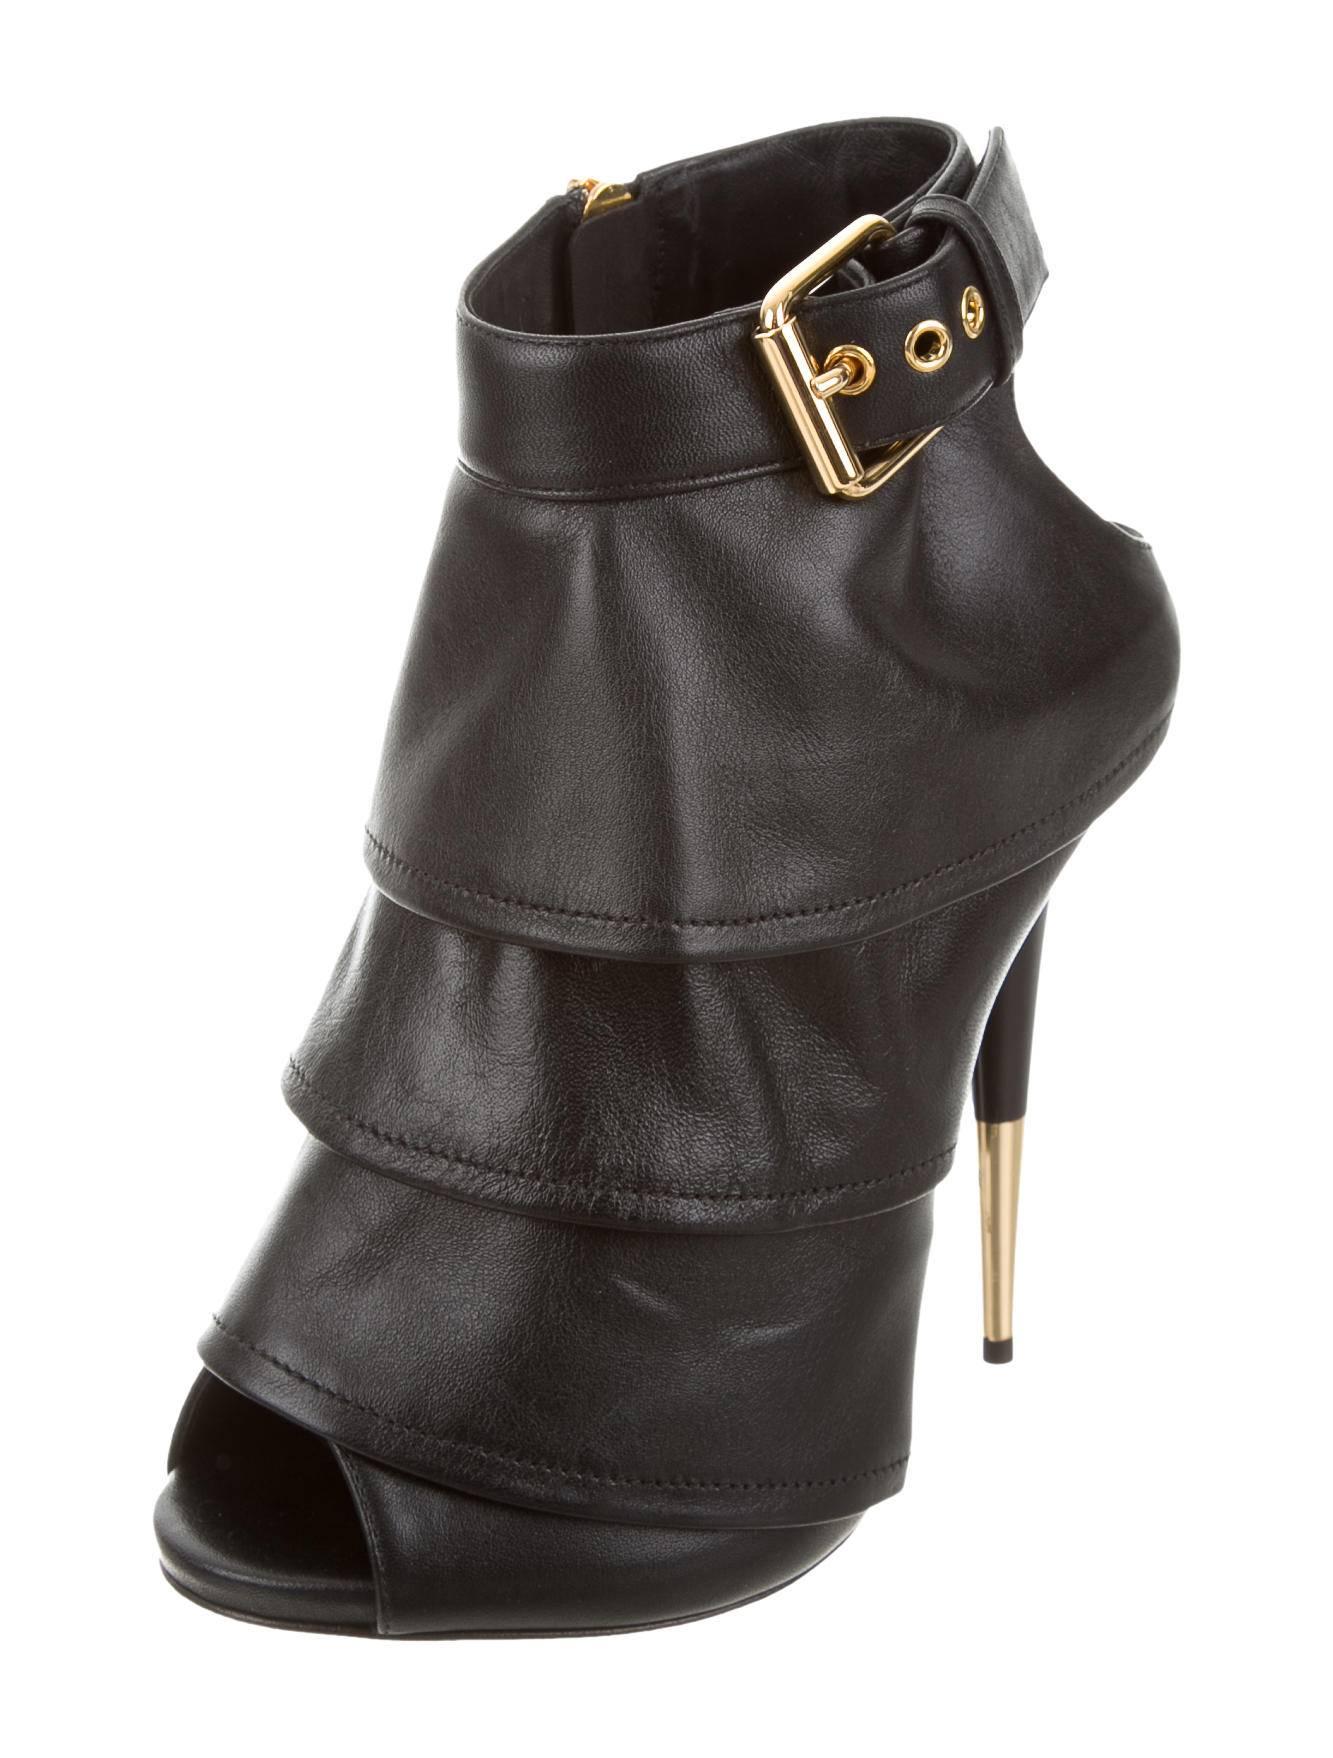 CURATOR'S NOTES

Giuseppe Zanotti NEW & SOLD OUT Black Leather Gold Heels in Box  

Size IT 37
Leather
Resin
Gold tone hardware
Zipper closure
Made in Italy
Heel height 4.75"
Includes original Giuseppe Zanotti dust bag and box